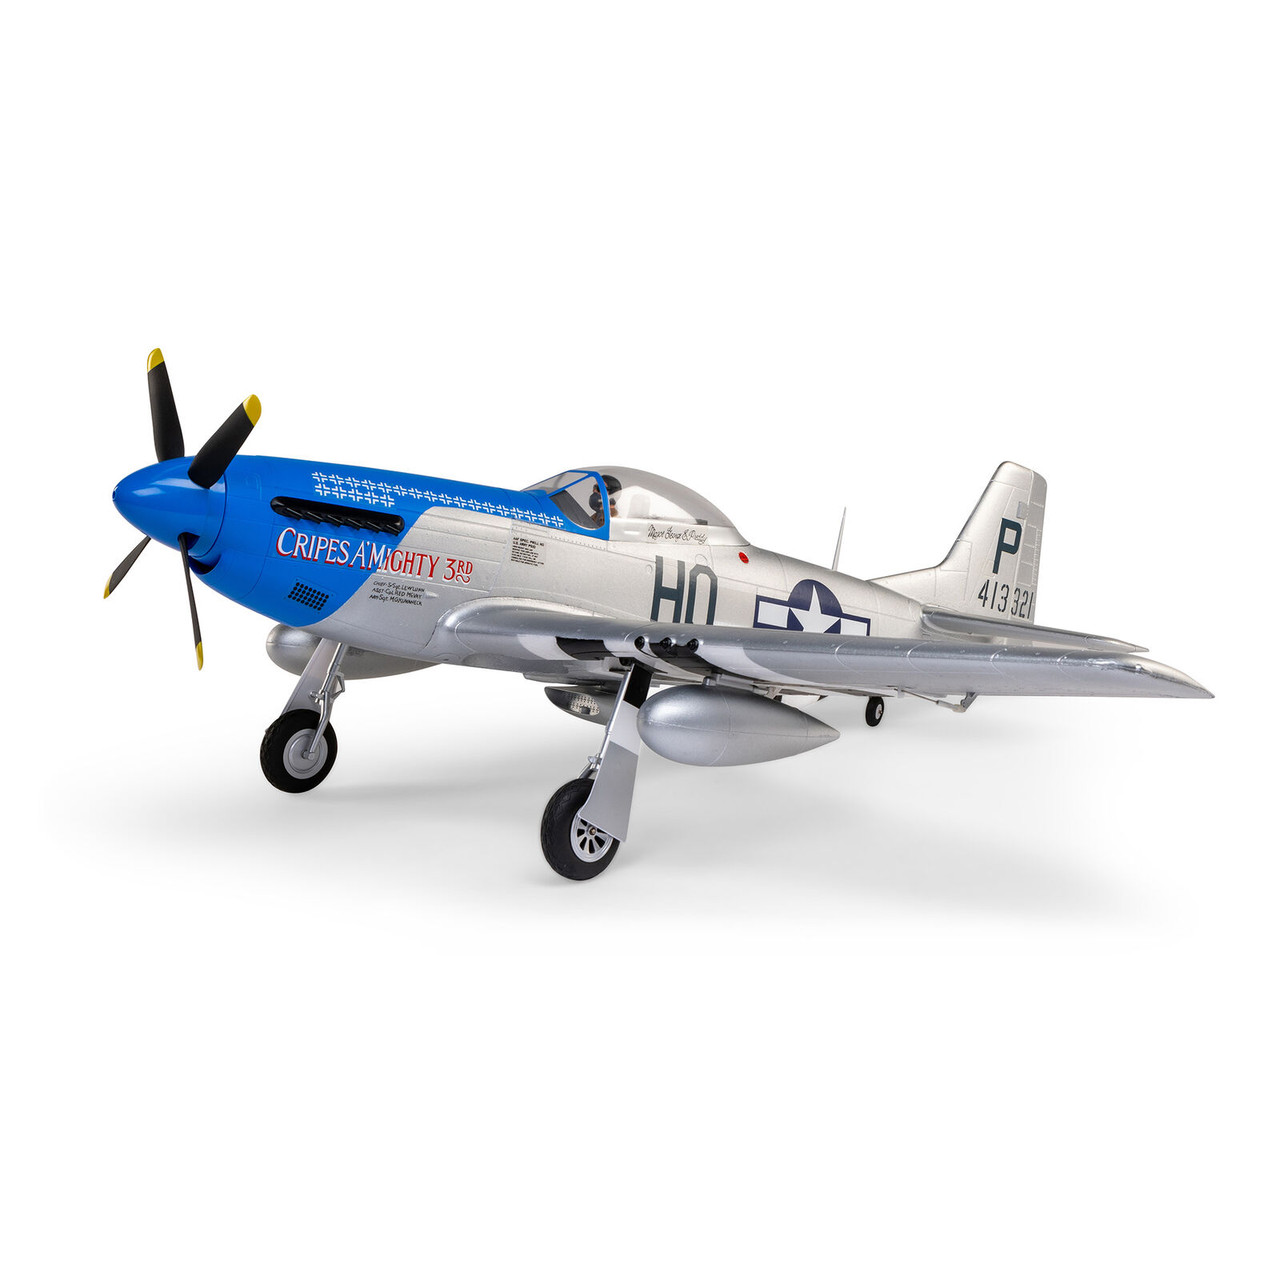 Eflite P-51D Mustang Cripes A’Mighty 3rd 1.2m BNF Basic 